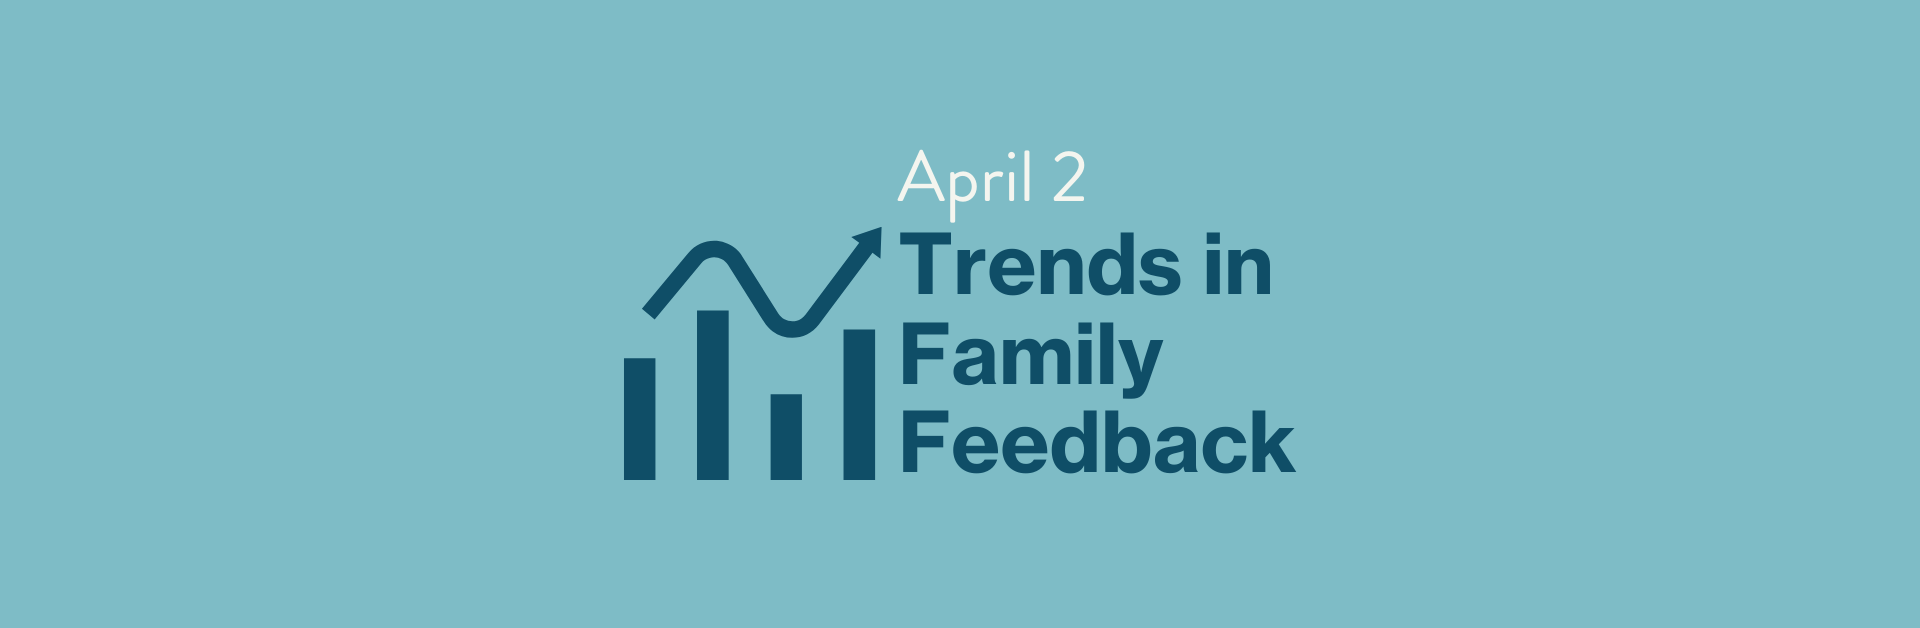 image of bar graph with the words "April 2, Trends in Family Feedback"